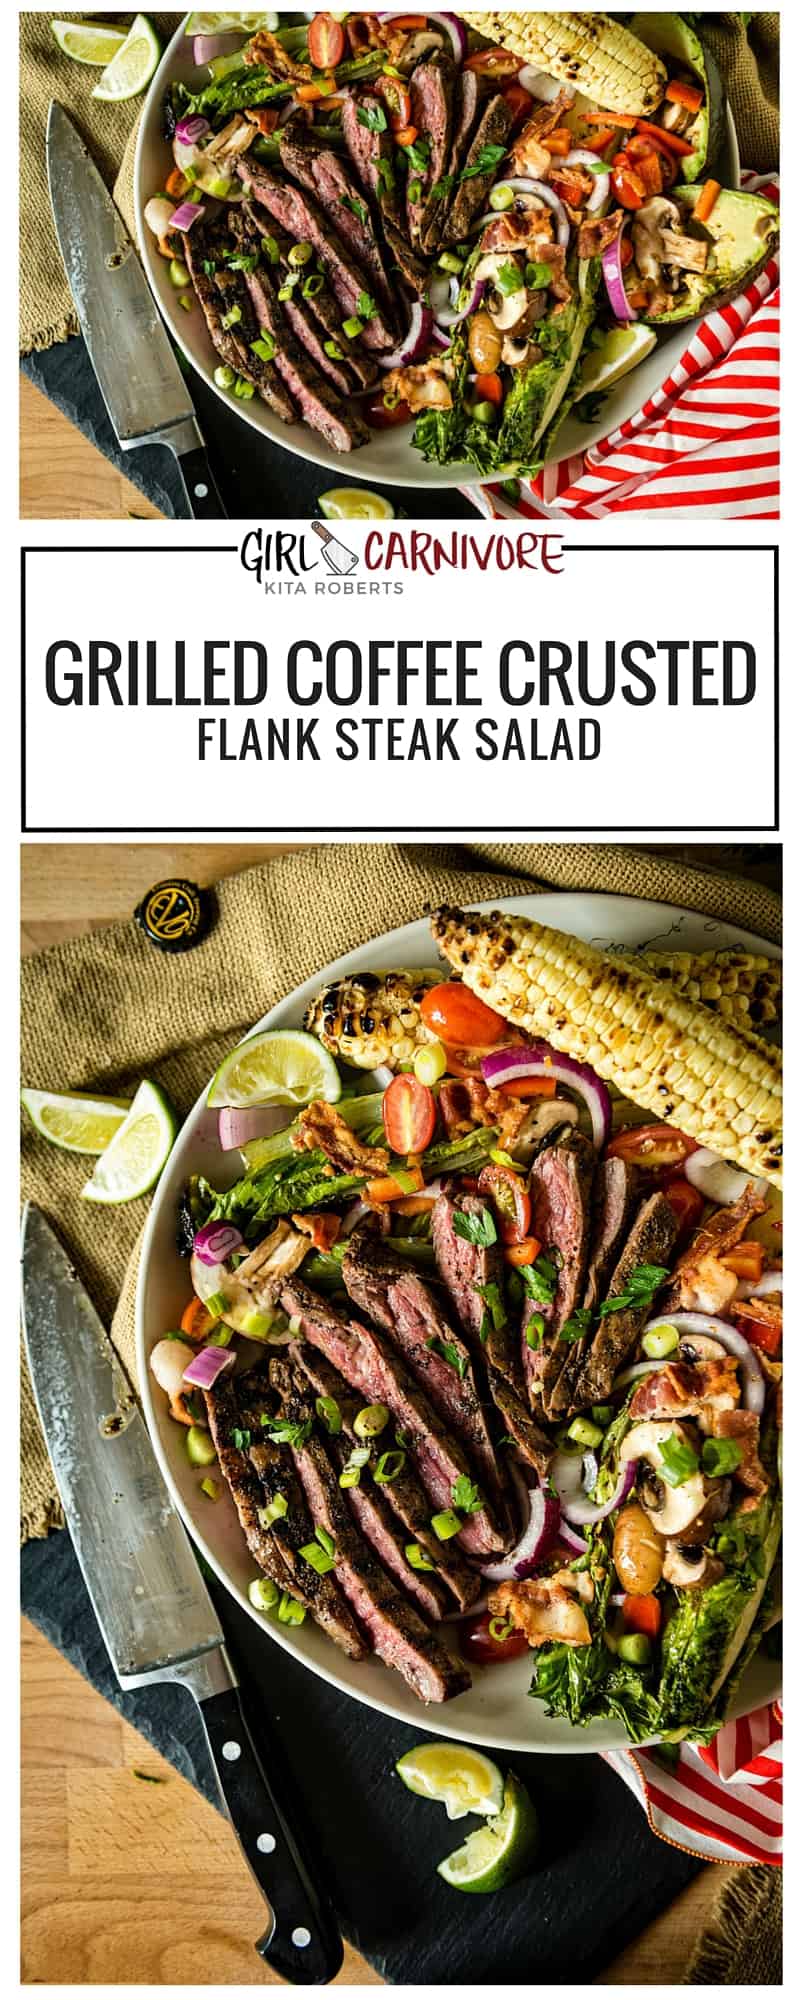 Grilled Coffee Crusted Flank Steak Salad - the perfect light summer salad for grill enthusiasts! Recipe at GirlCarnivore.com